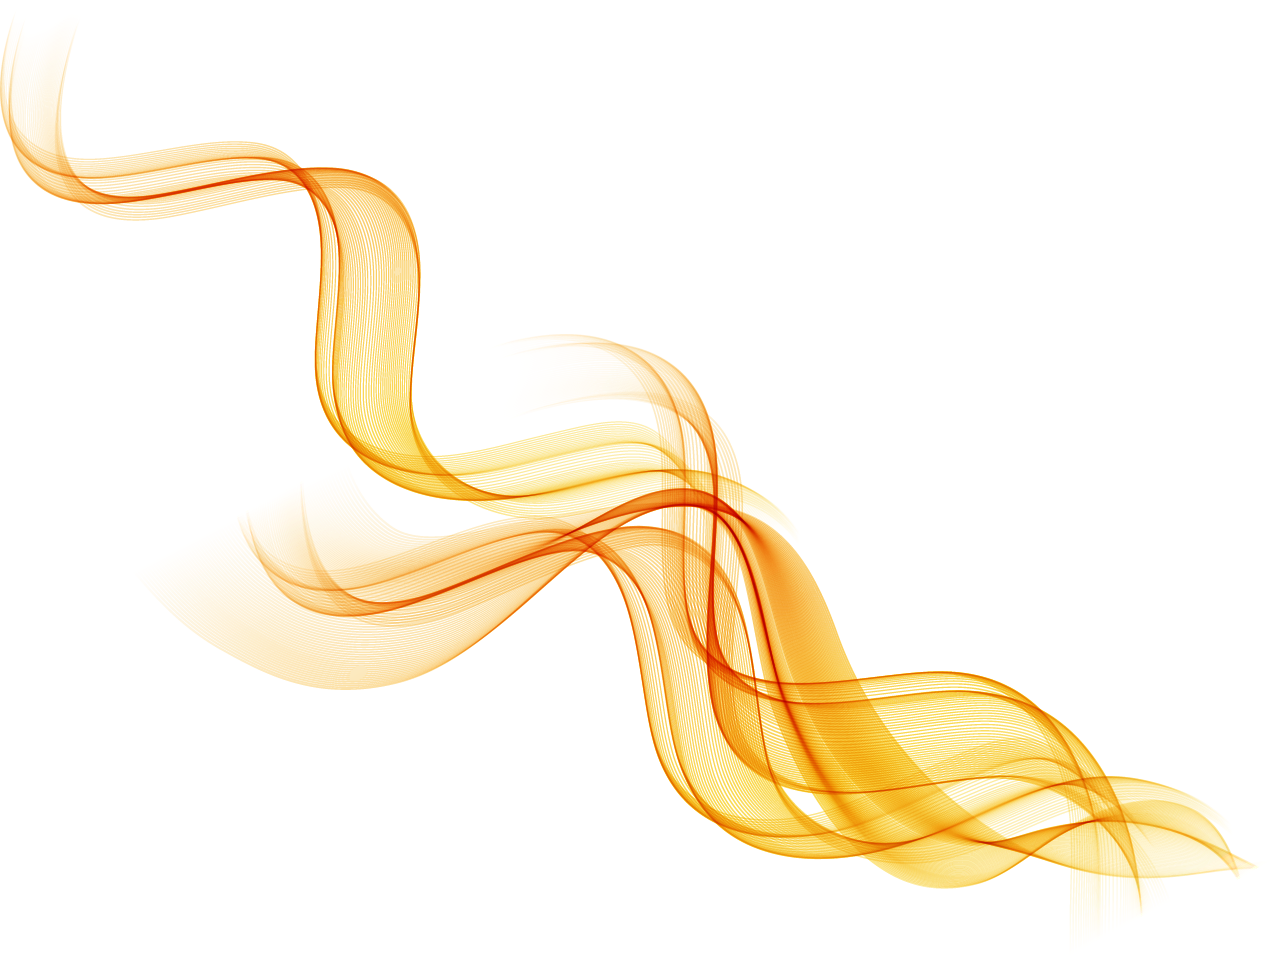 A Yellow And White Swirls On A Black Background